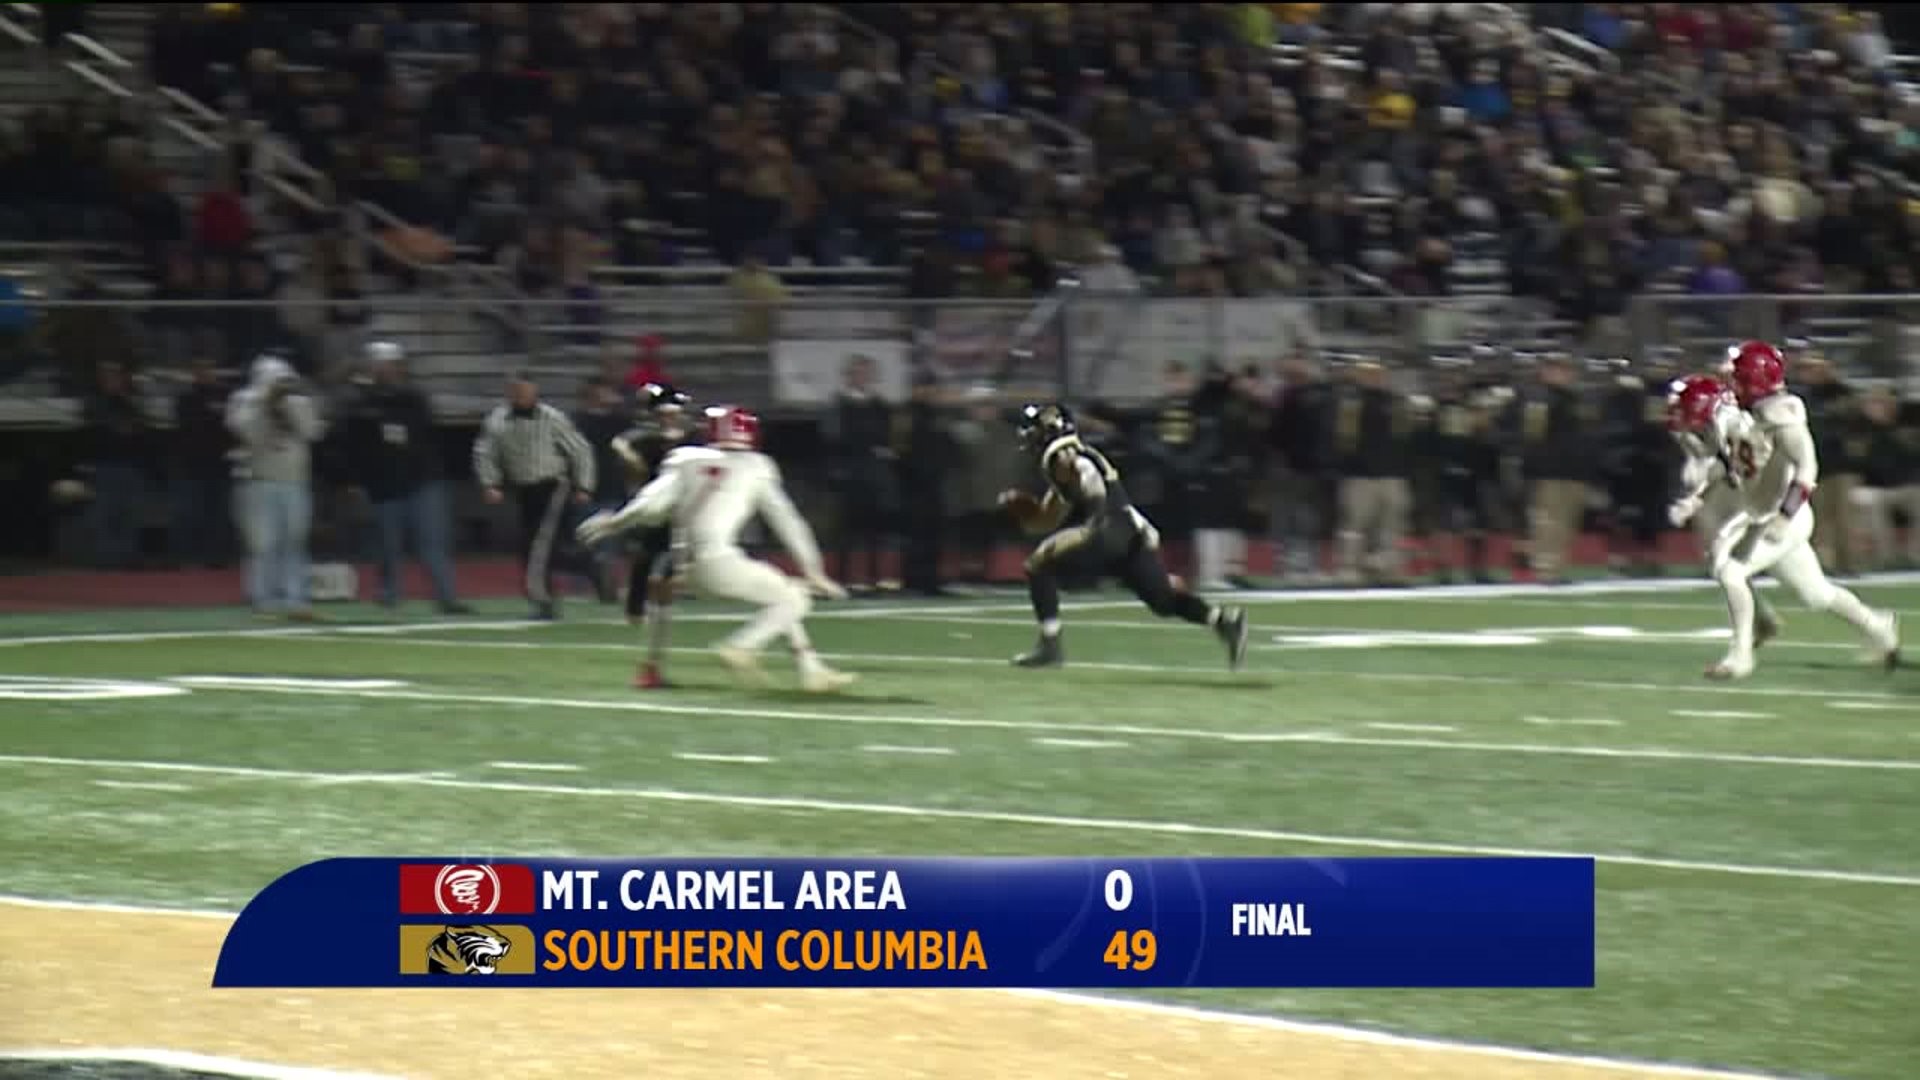 Southern Columbia Wins 27th District Title in Last 29 Years